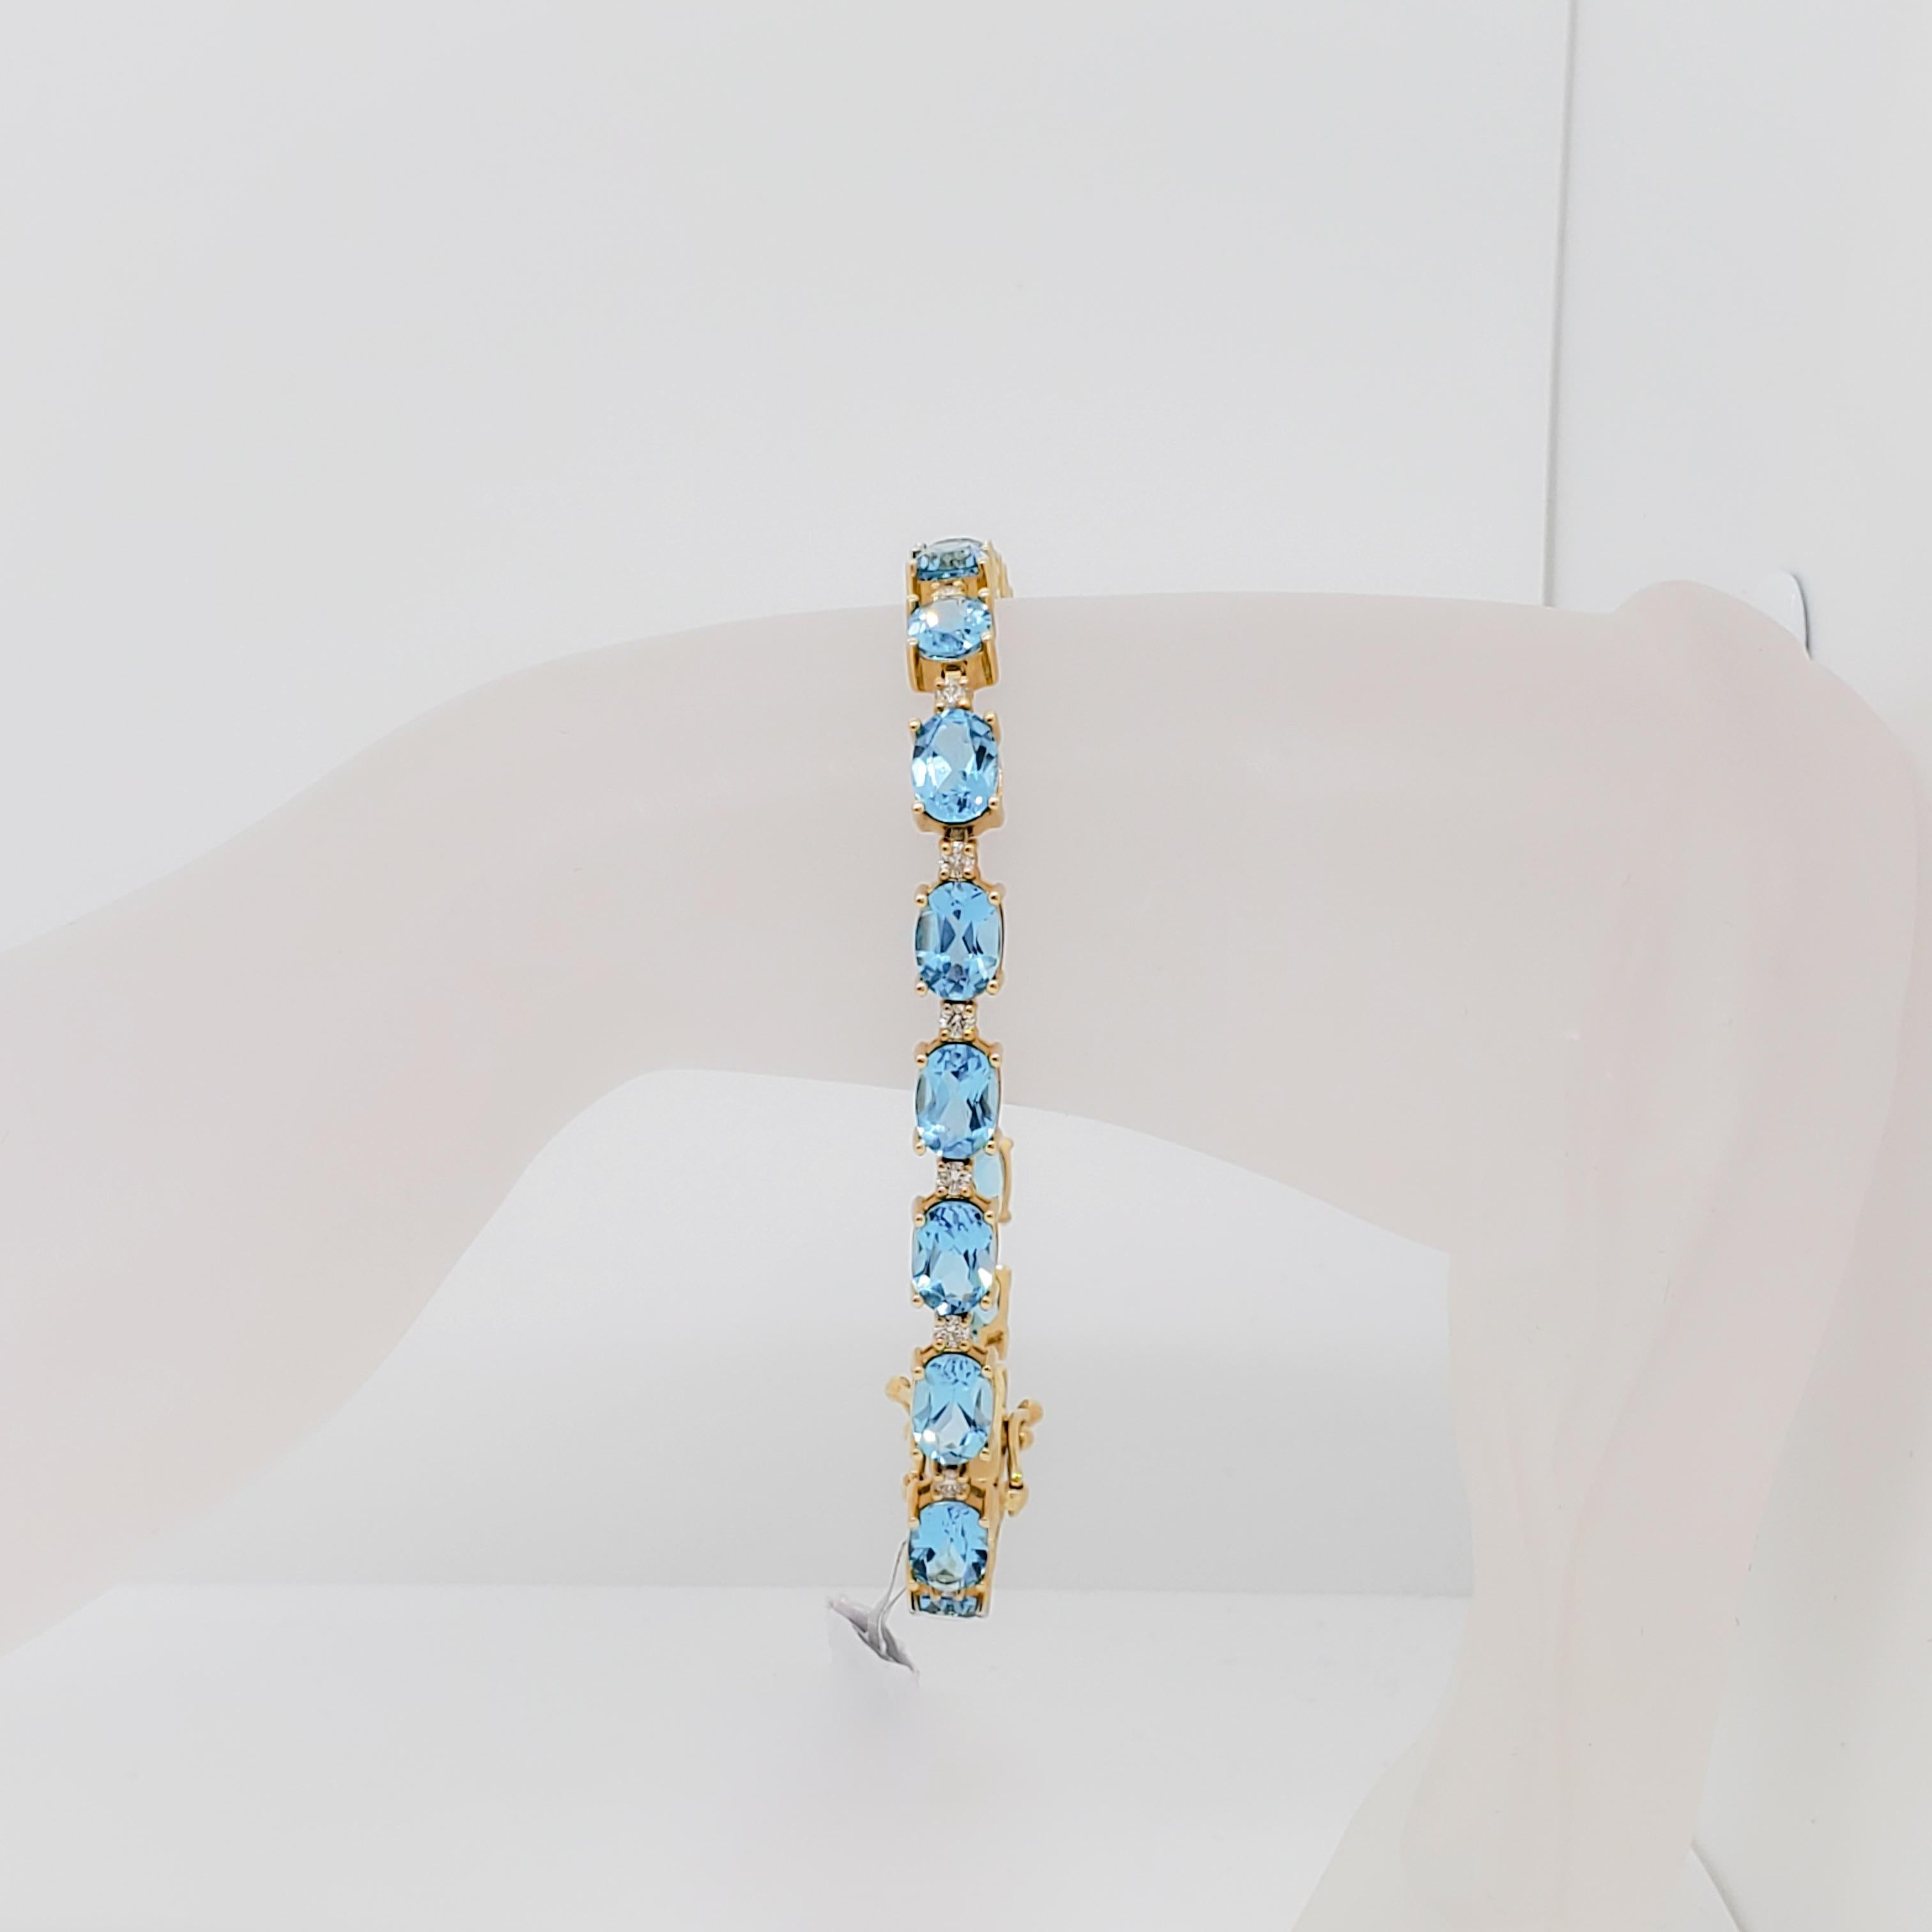 Beautiful bracelet with 17.44 ct. blue topaz ovals and 0.67 ct. white diamond rounds. 19 blue topaz stones and 19 diamonds total. Handmade in 14k yellow gold. Length 7.5